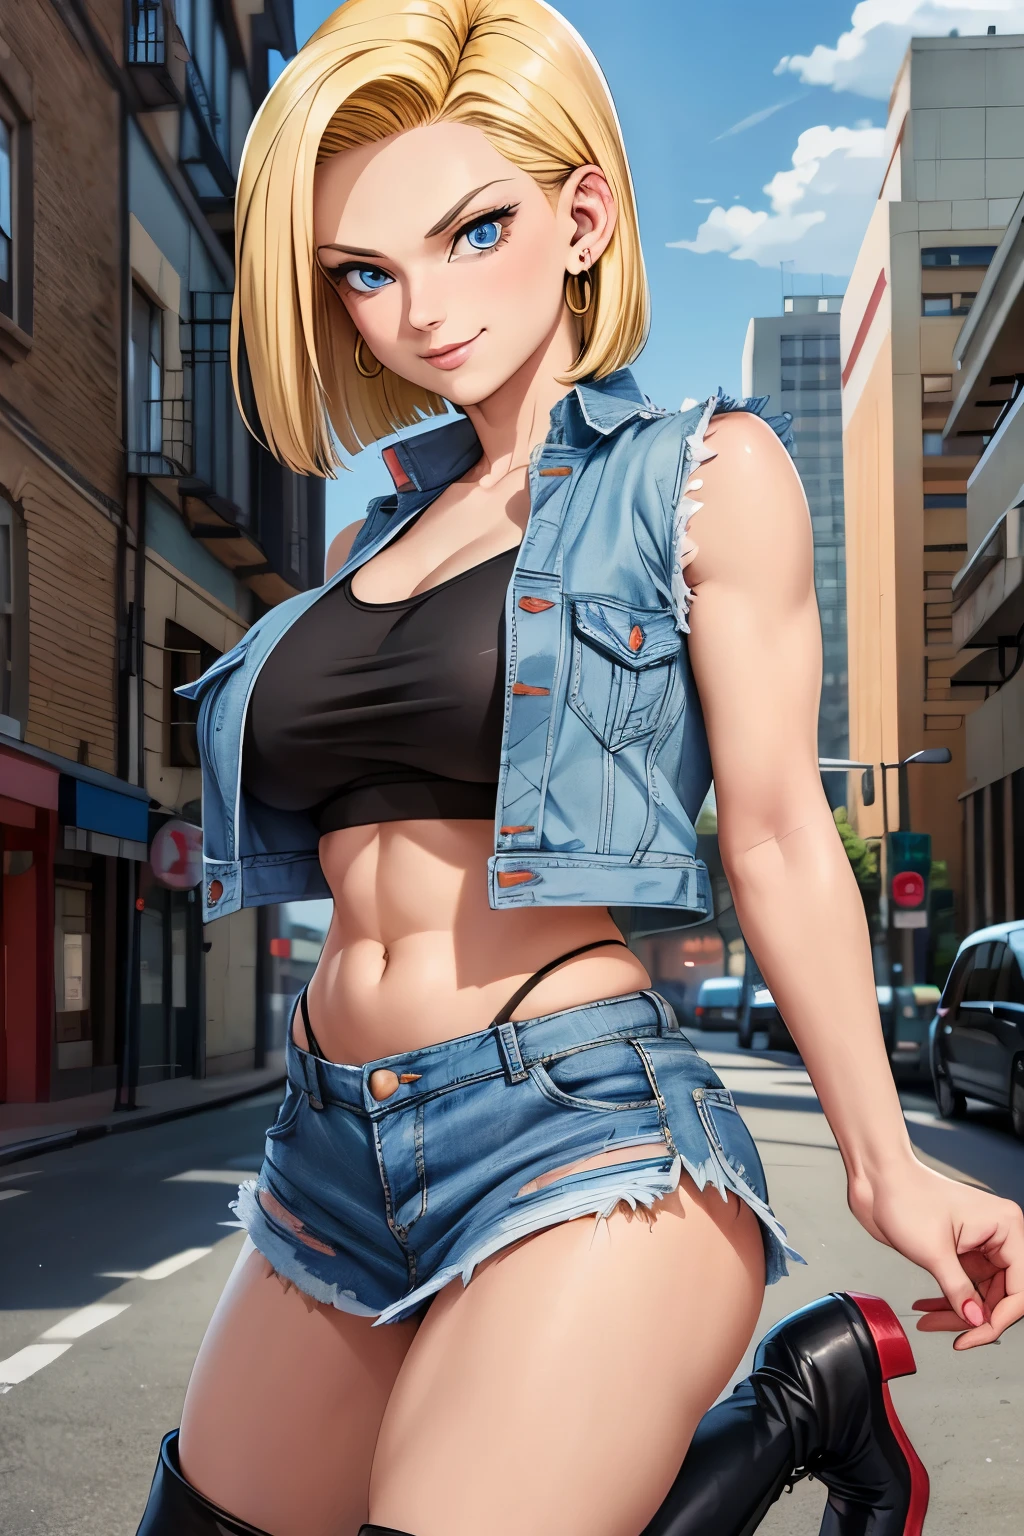 Best Quality, Android 18, Solo, Blonde hair, Blue eyes, Short hair, A smile, earrings, Jewelry, Denim Vest, open vest, black bra, Denim miniskirt, Black knee-high boots, huge breasts, buttocks sticking out and turning around, Street